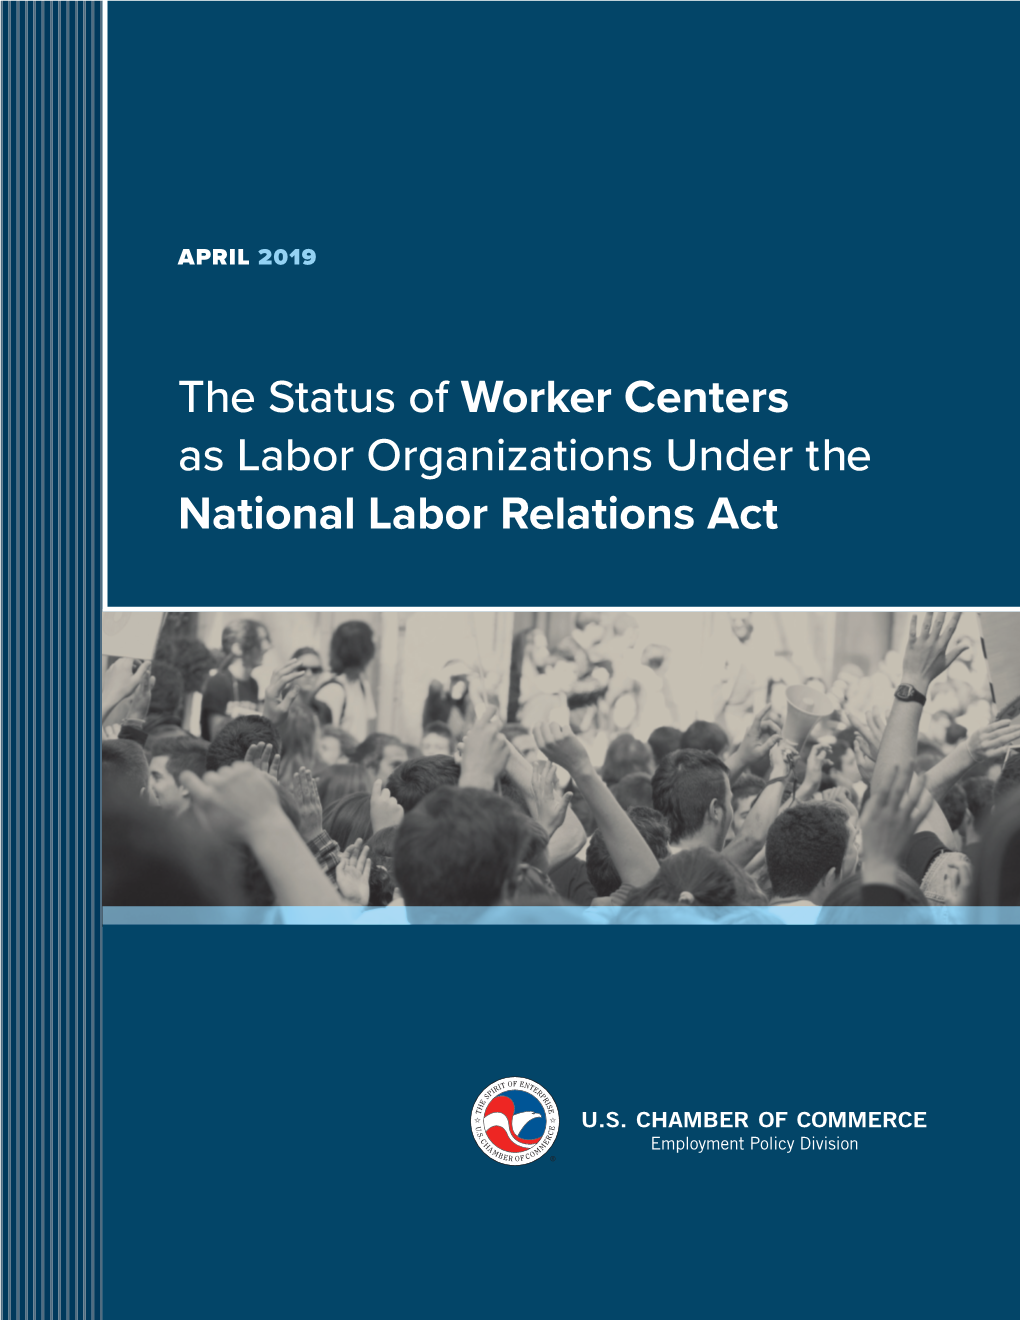 The Status of Worker Centers As Labor Organizations Under the National Labor Relations Act the U.S